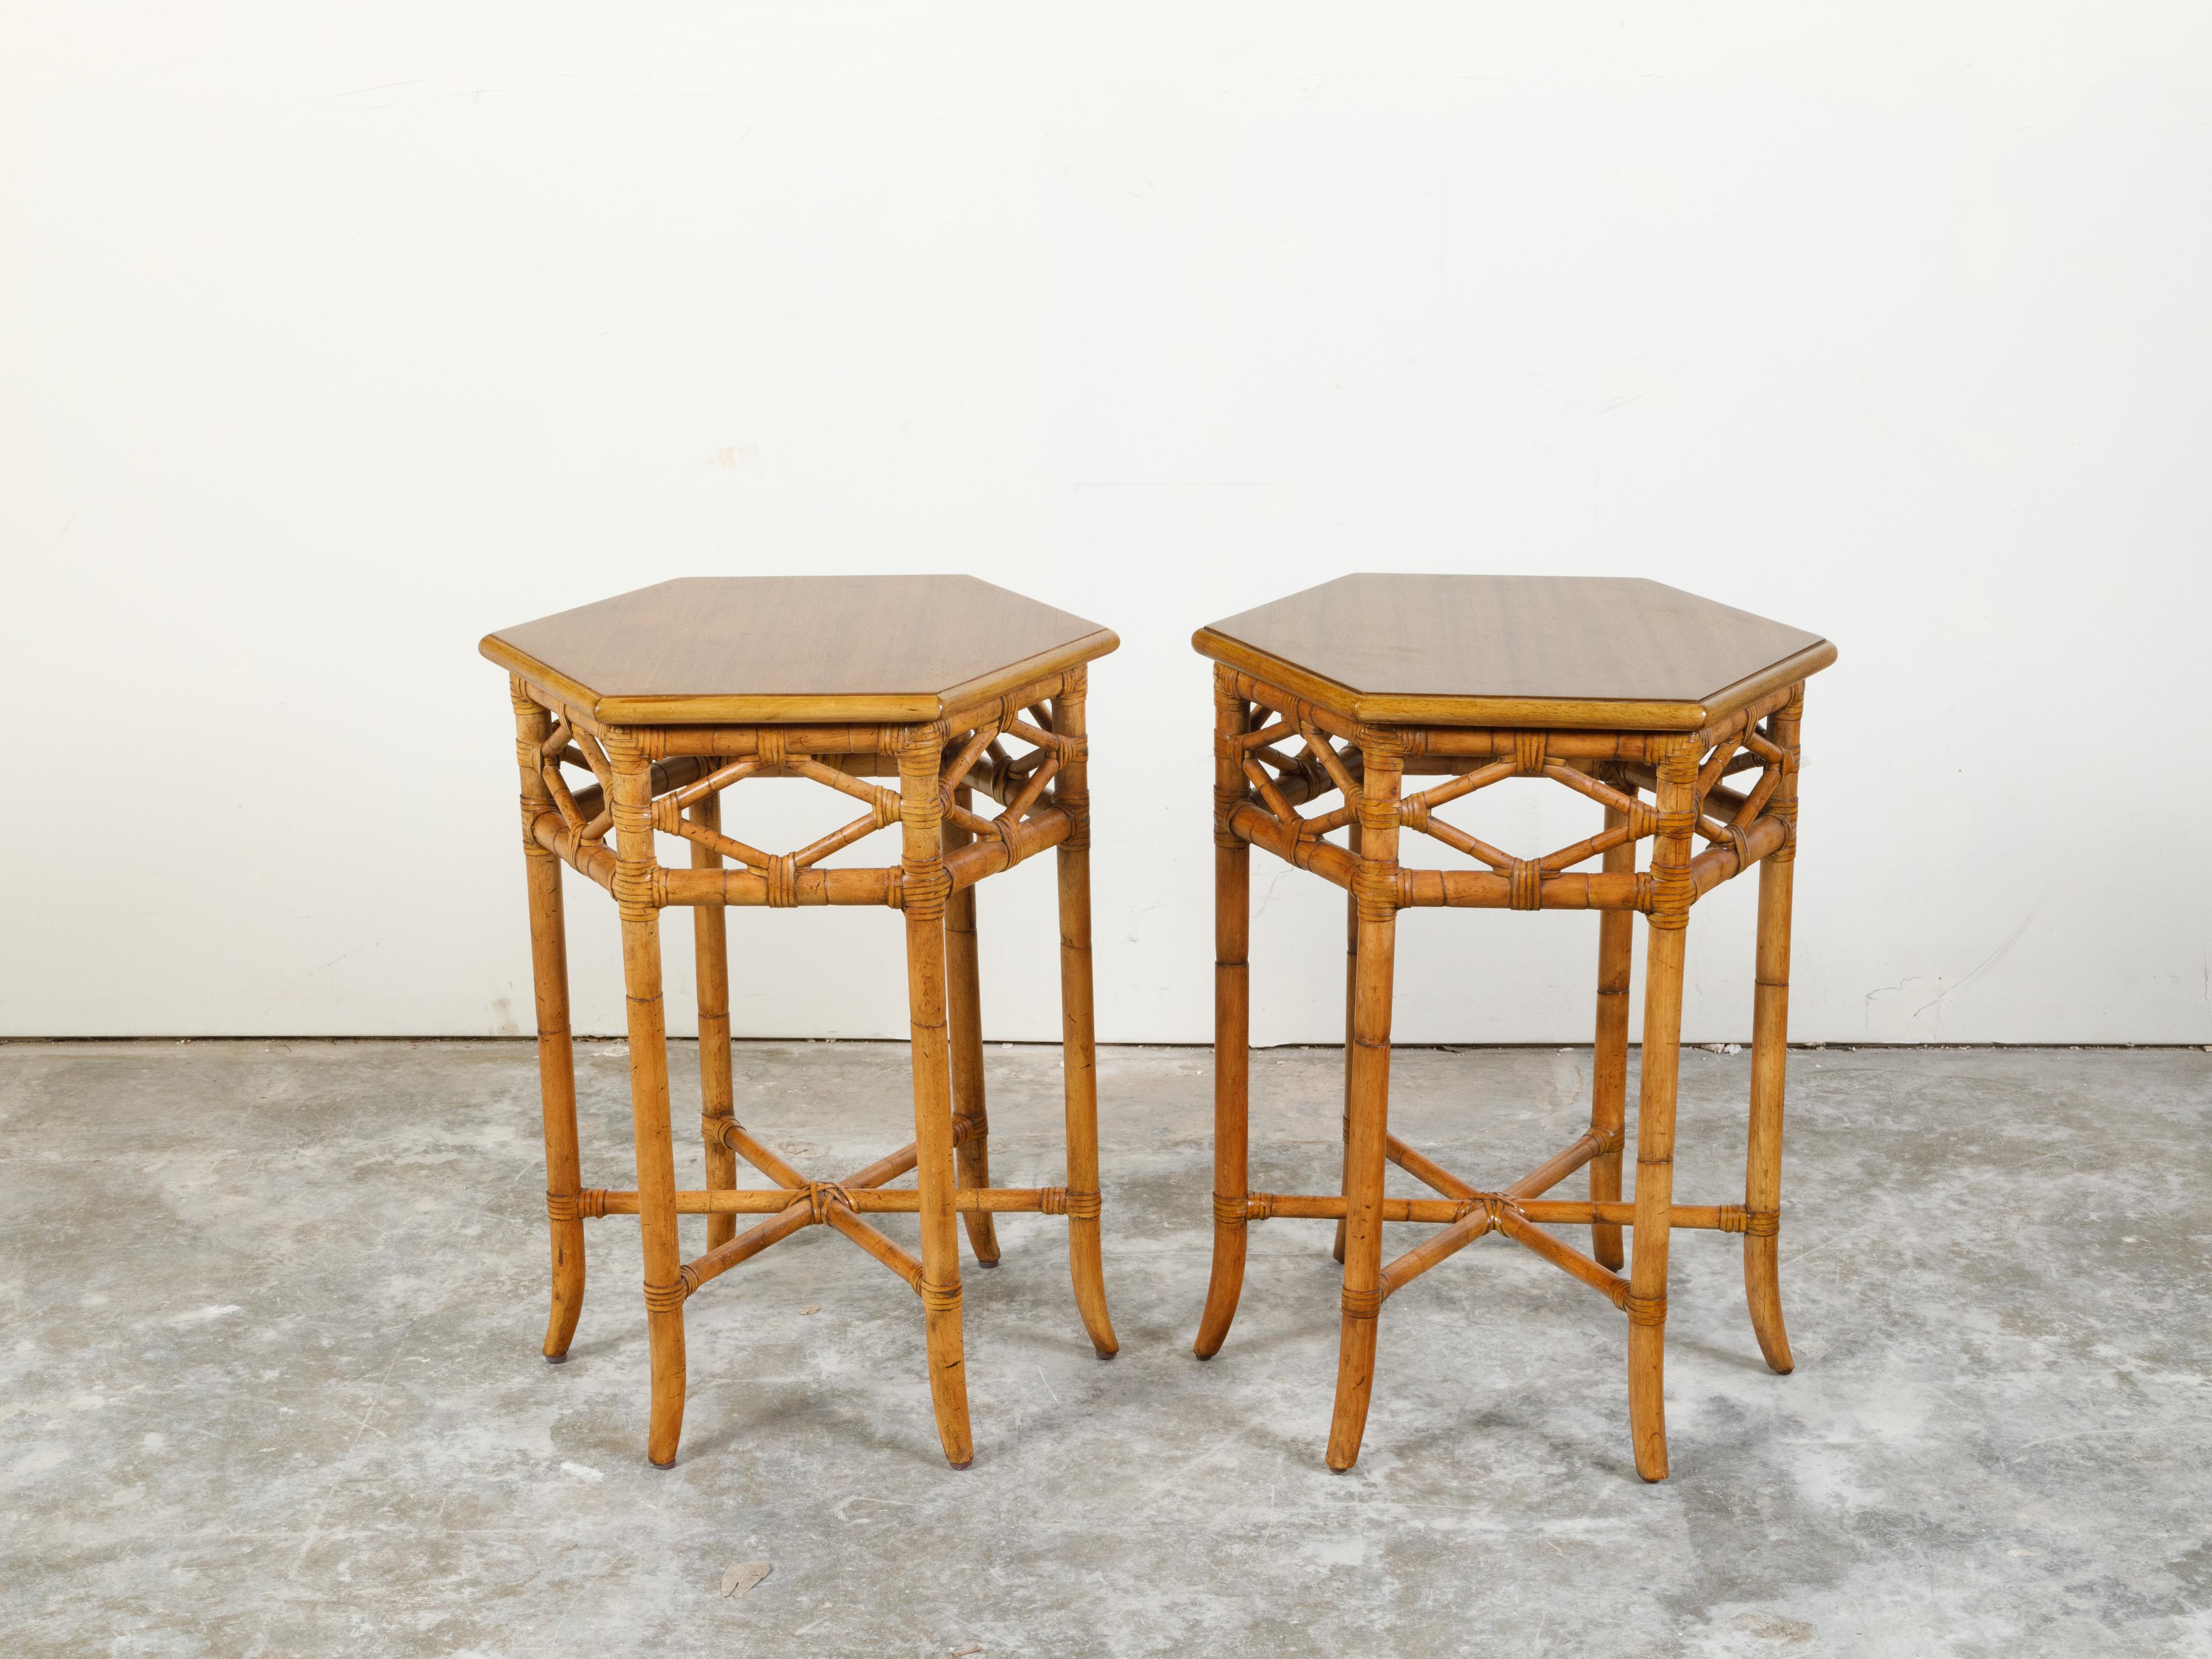 A pair of English Chinoiserie style faux bamboo side tables from the mid 20th century, with hexagonal tops and star-shaped cross stretchers. Created in England during the midcentury period, each of this pair of side tables features an hexagonal top